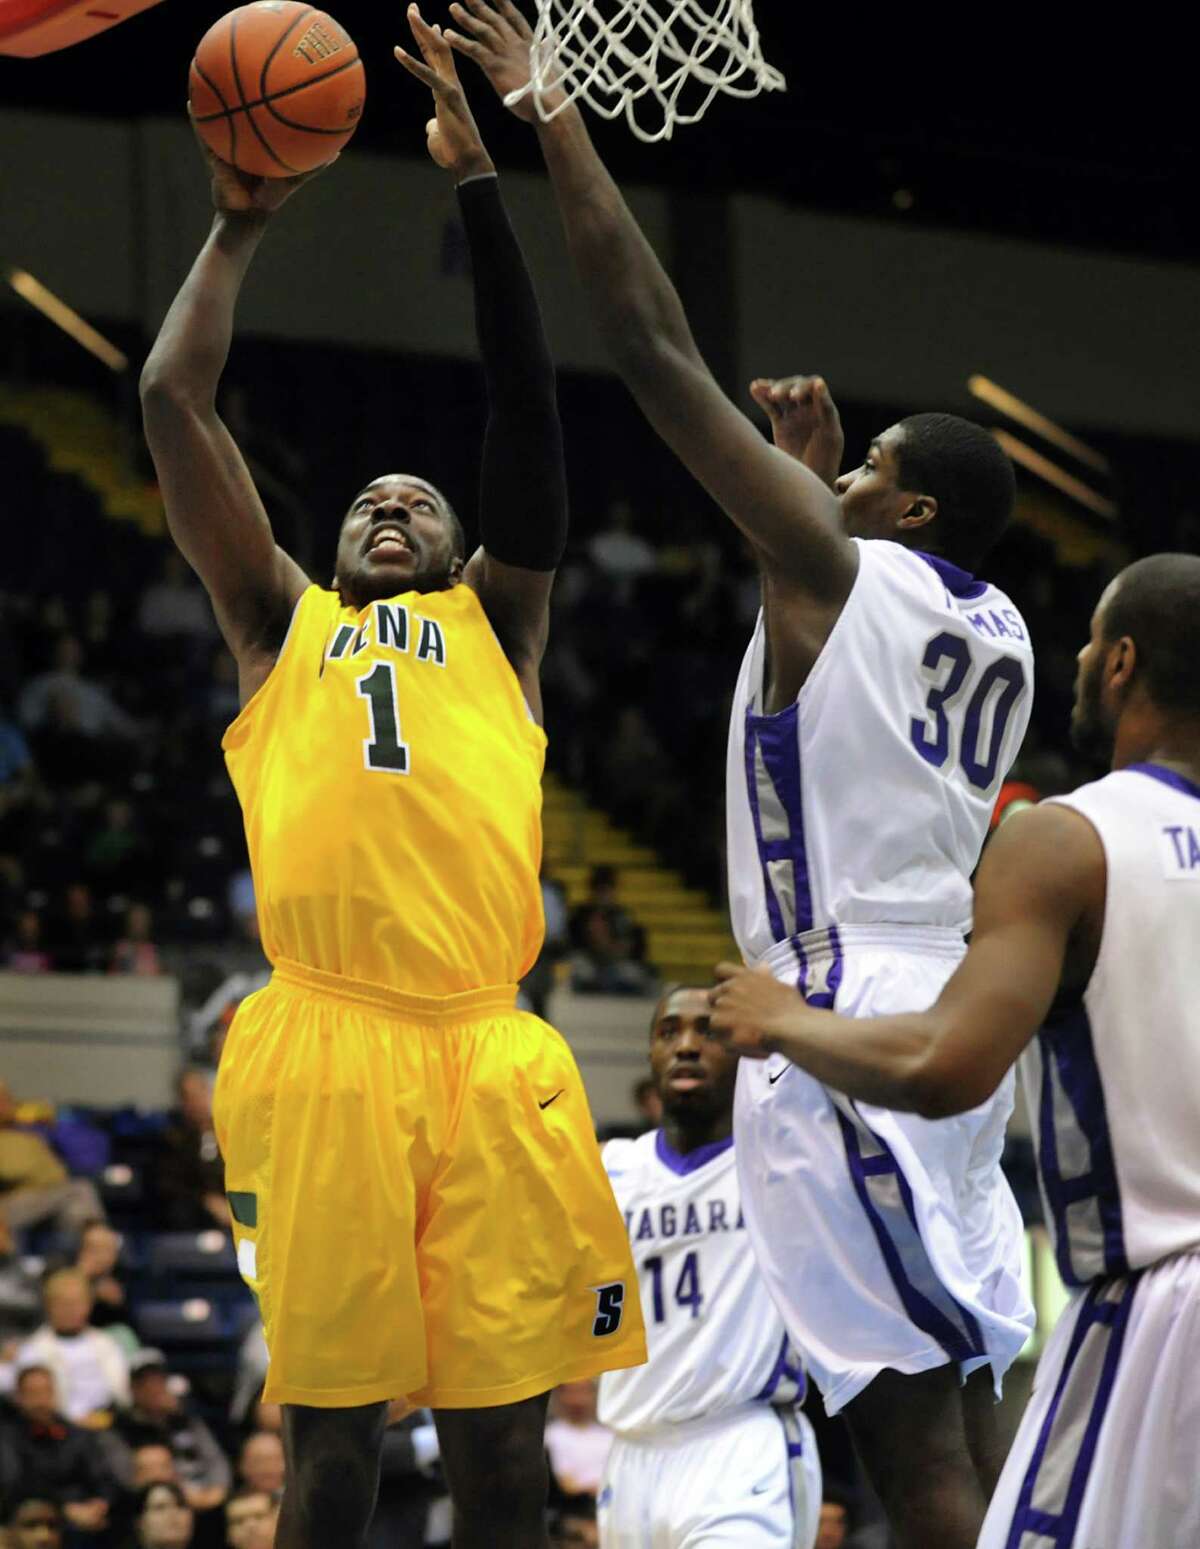 Siena's O.D. Anosike (1), left, shoots for two points as Niagara's Joe Thomas (30) defends in their quarterfinal MAAC Championship basketball game on Saturday, March 9, 2013, at MassMutual Center in Springfield, Mass. (Cindy Schultz / Times Union)